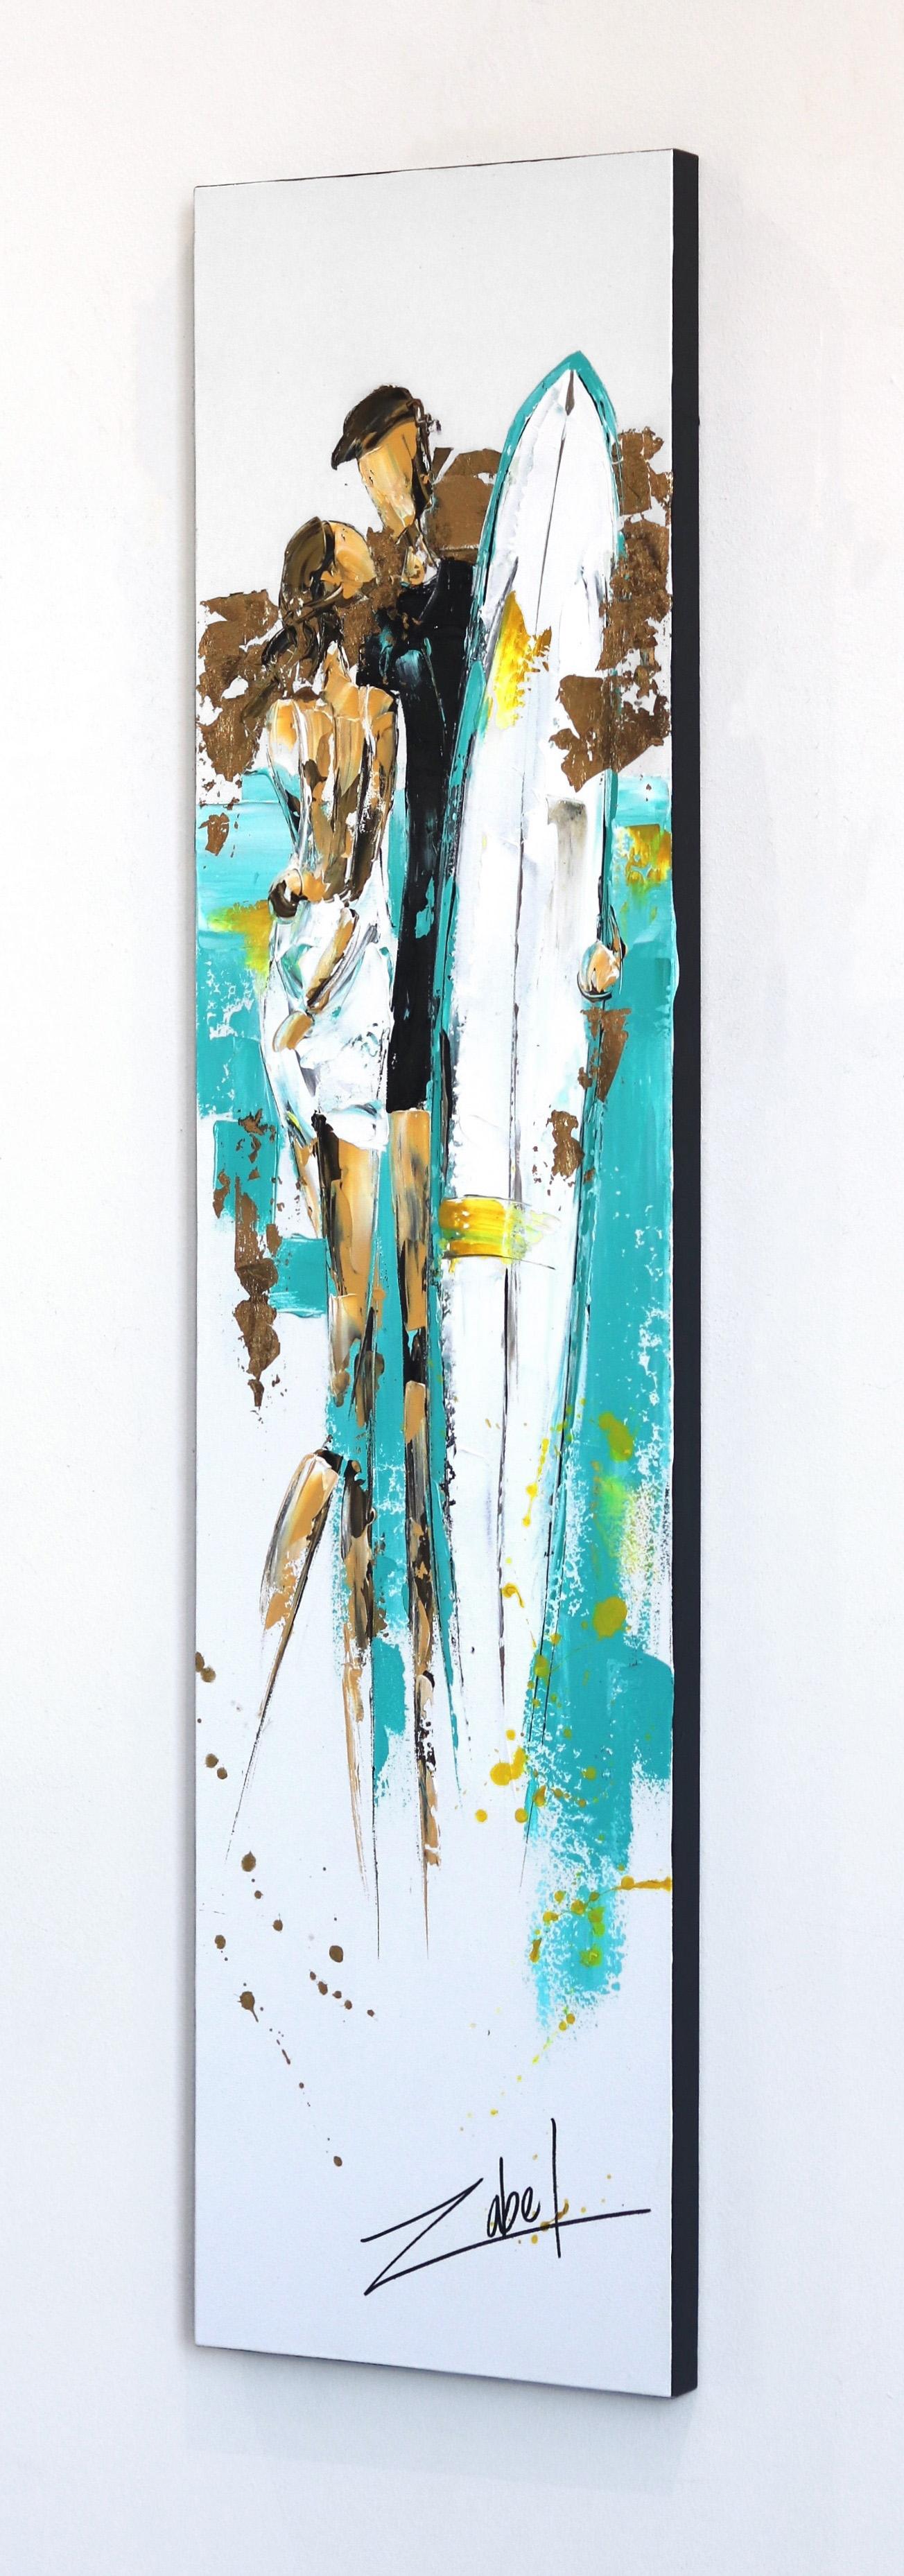 Surf & Chic  - Gold Figurative Painting by Zabel